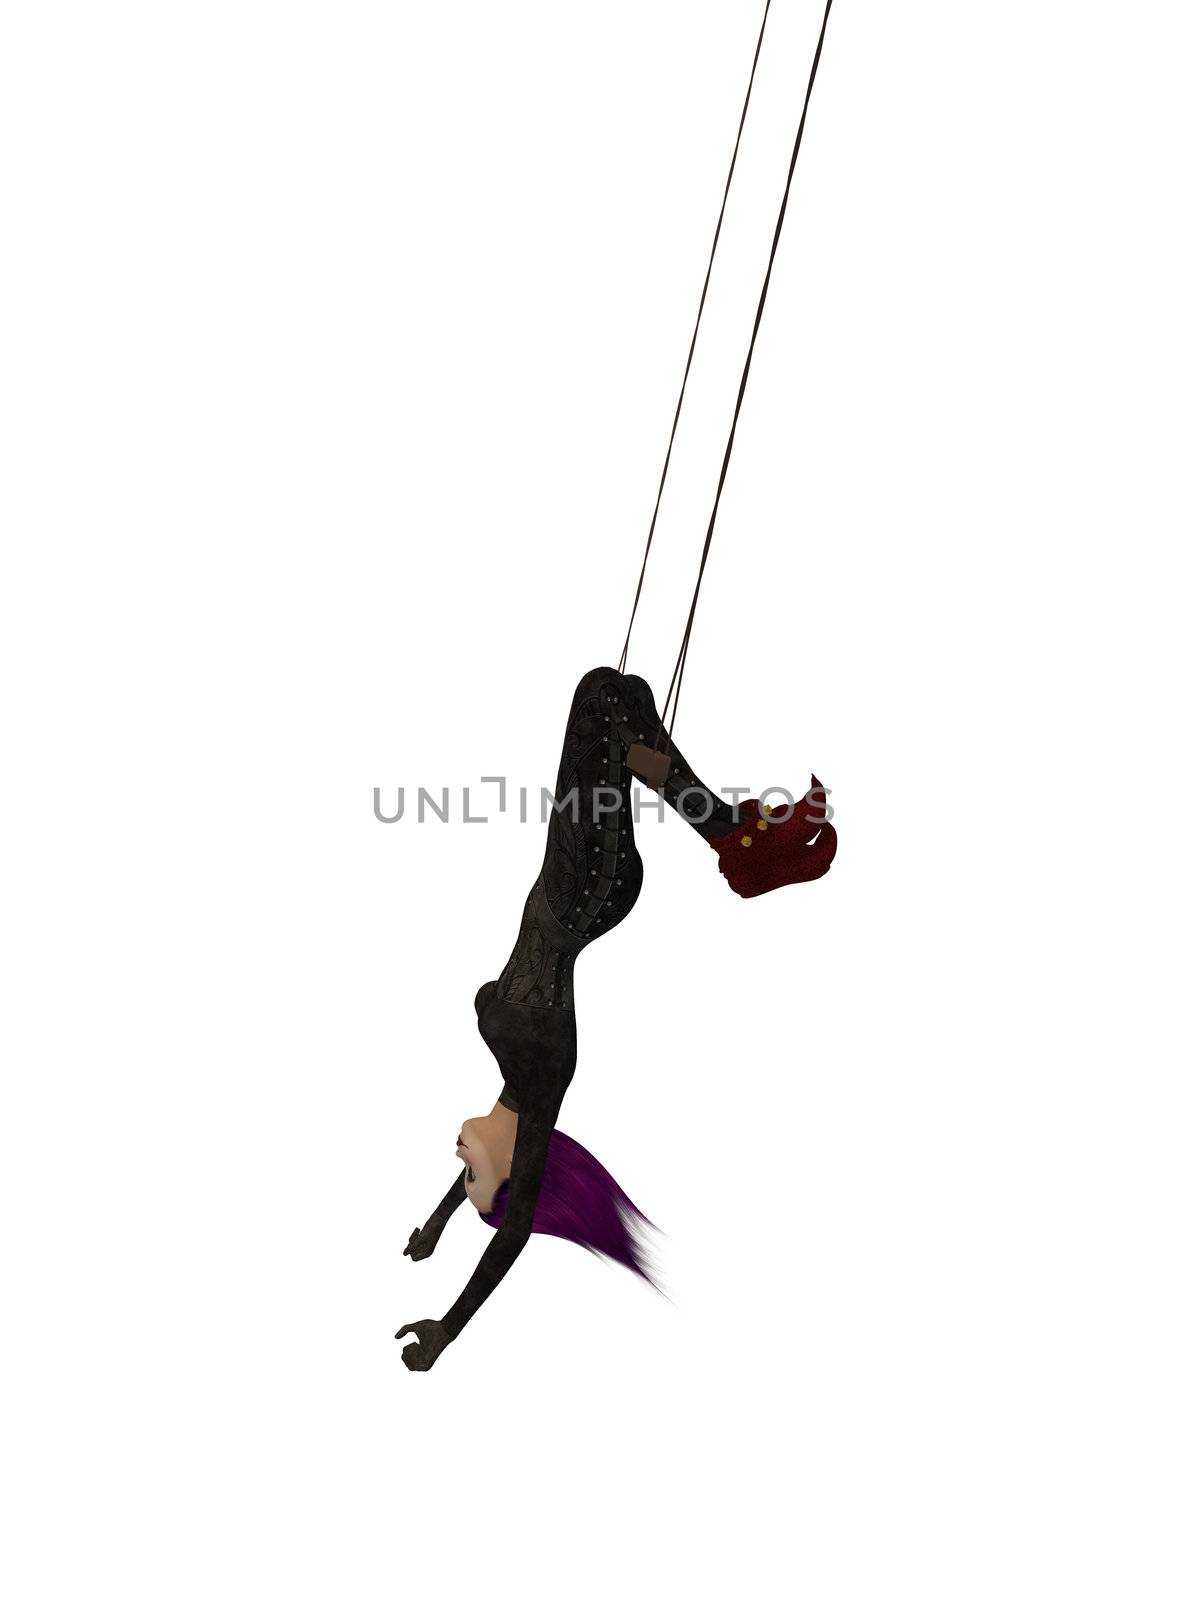 Clown handing upside down on a trapeze on a white background